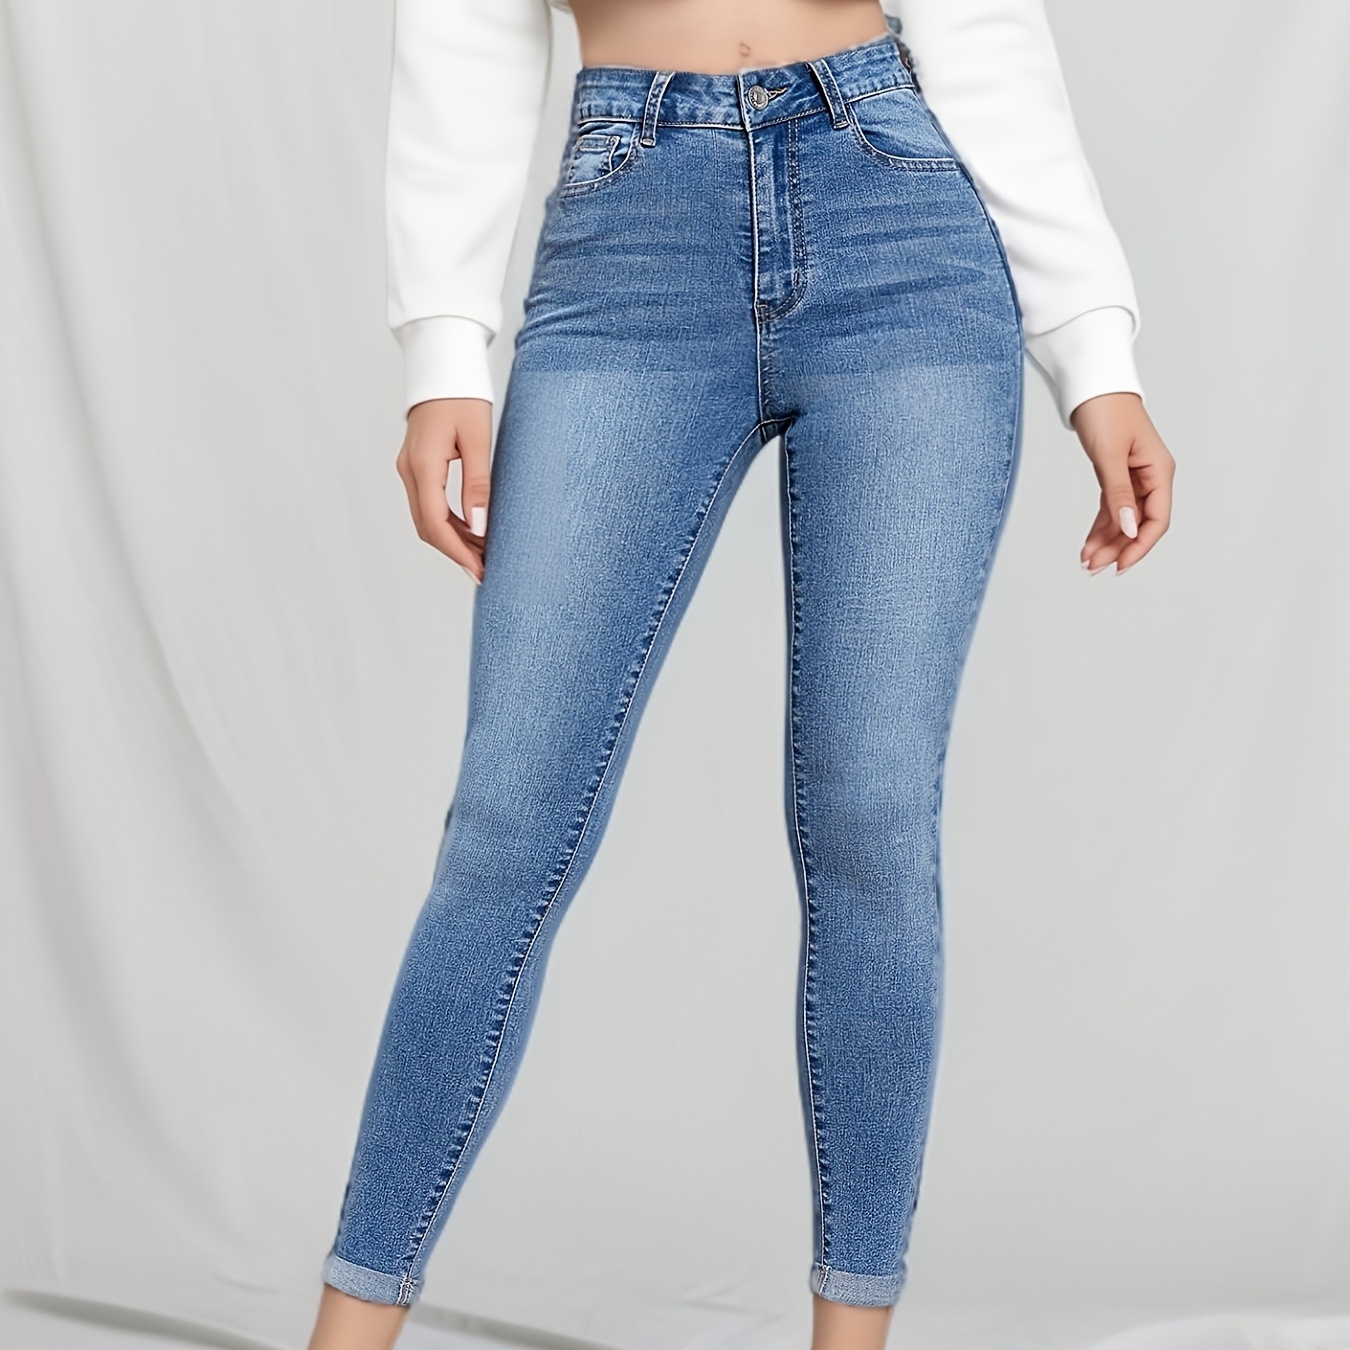 

Women's Elegant High-waisted Skinny Fit Jeans With Cuffed Hem, Classic Blue Denim, Casual Chic Style For Everyday Wear For Fall & Winter